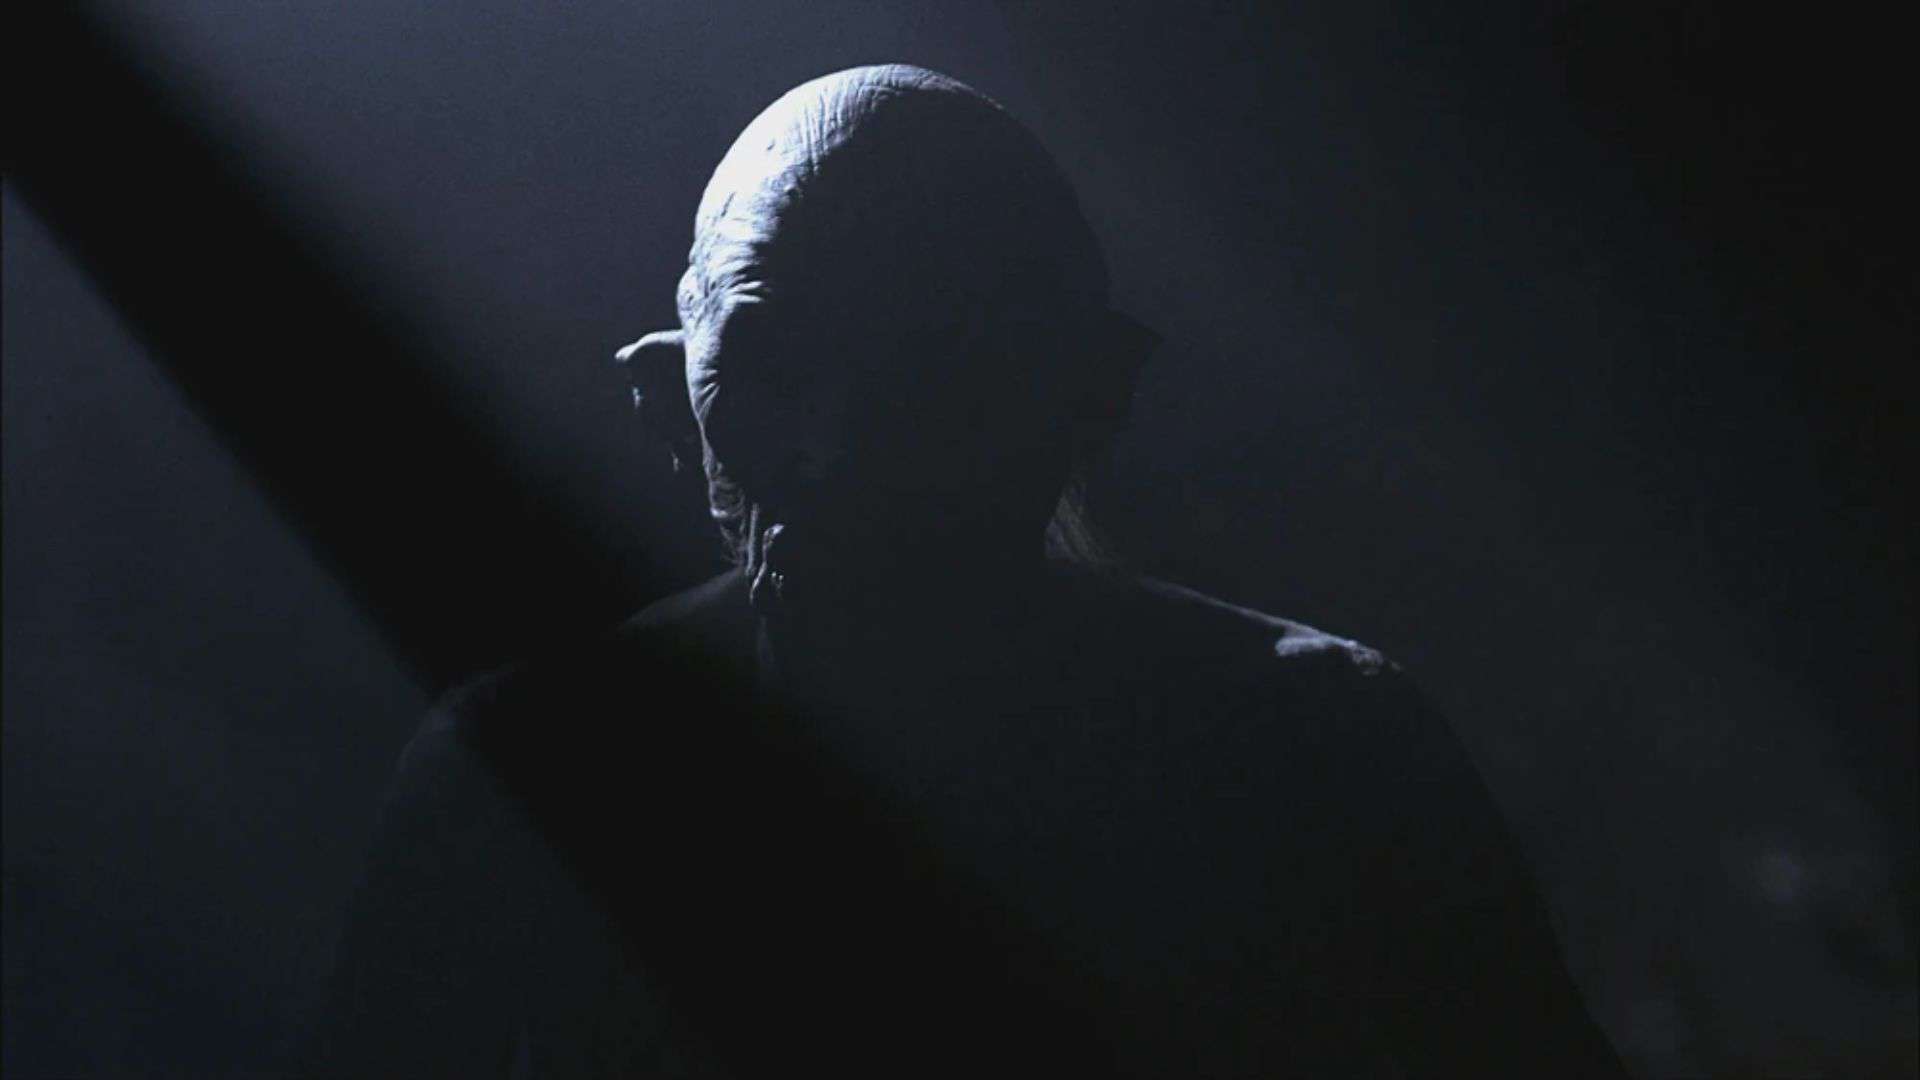 A wendigo hides in the shadows in this image from Warner Bros. Television.